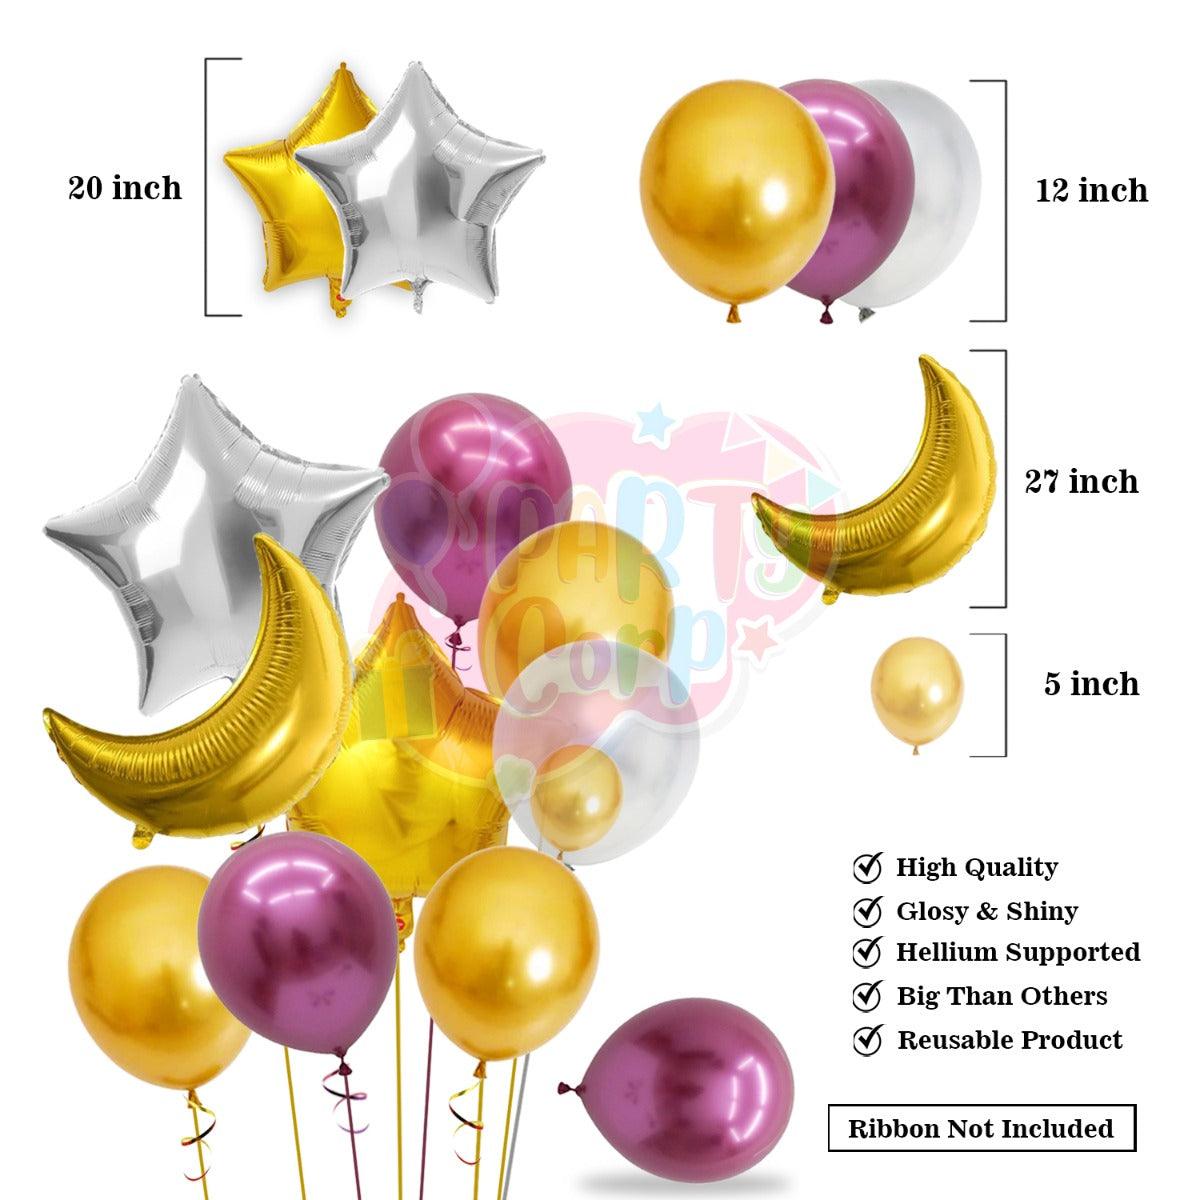 PartyCorp Happy Birthday Decoration Kit Combo 34 Pcs - Pink, Pink & Gold Chrome Balloons(24 pcs), 1 pc Pink & Gold Happy Birthday Printed Banner, 2 pc Pink Big Foil Curtain, 1 pc Moon & Star Foil Balloon Bouquet